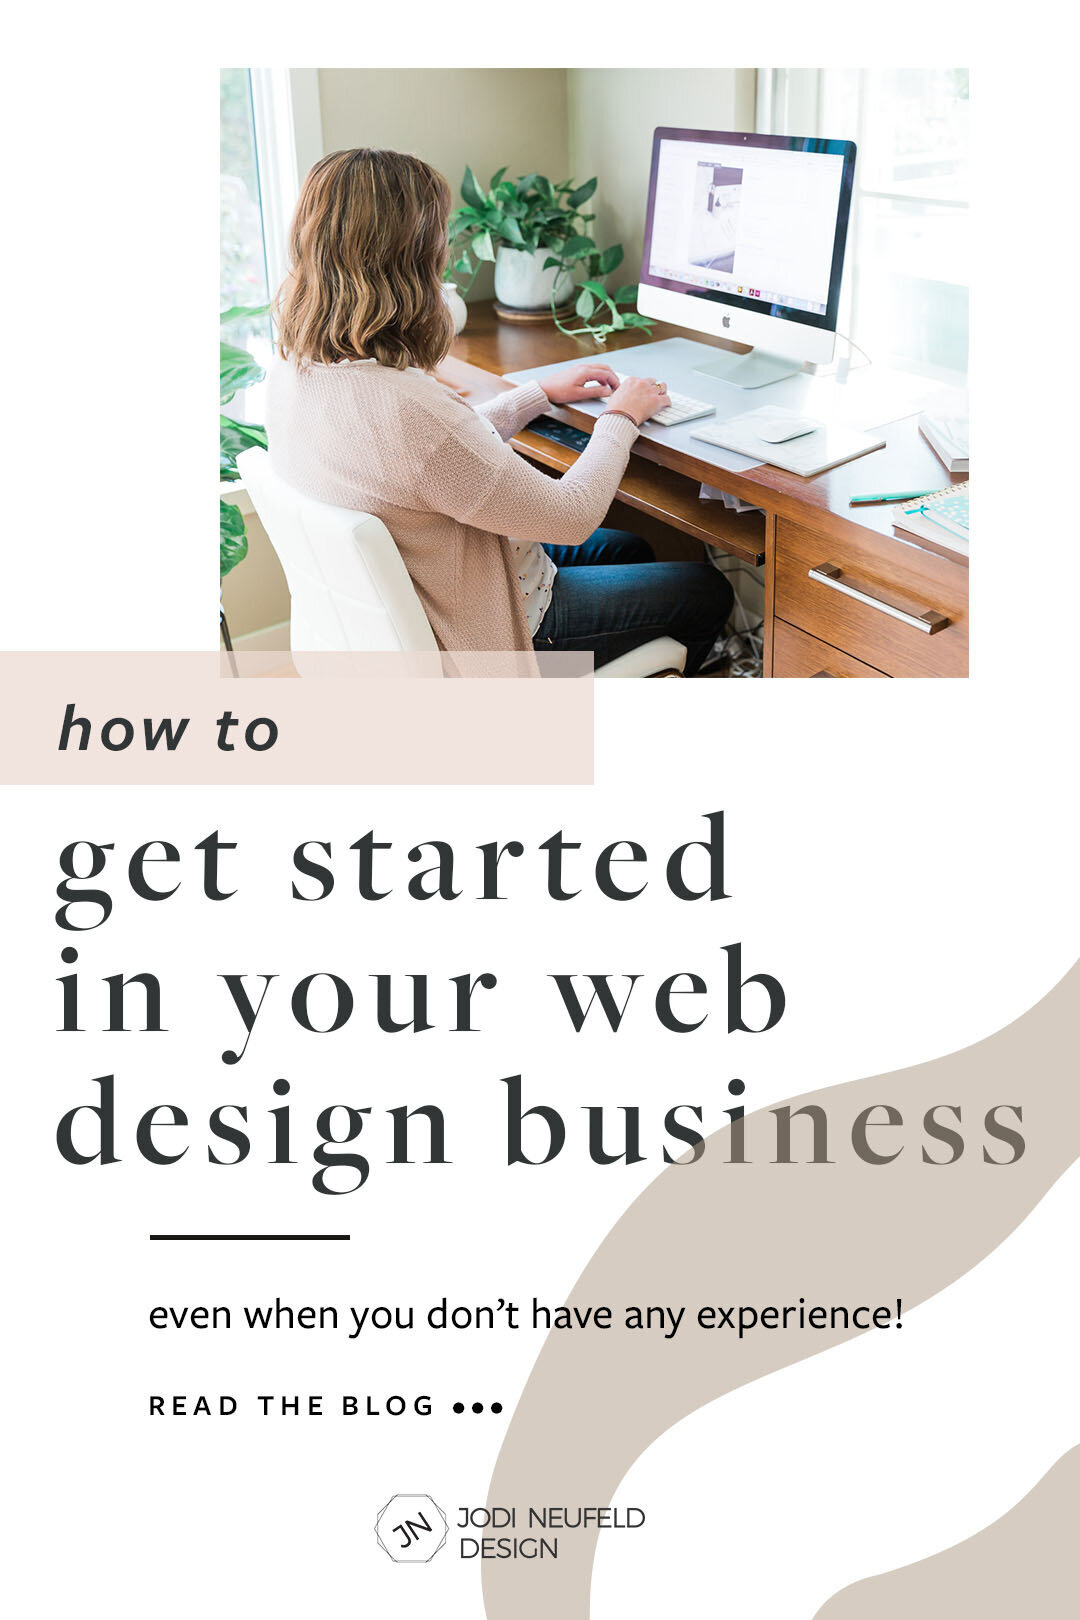  How to get started in your web design business by Jodi Neufeld Design | #squarespace web designer 